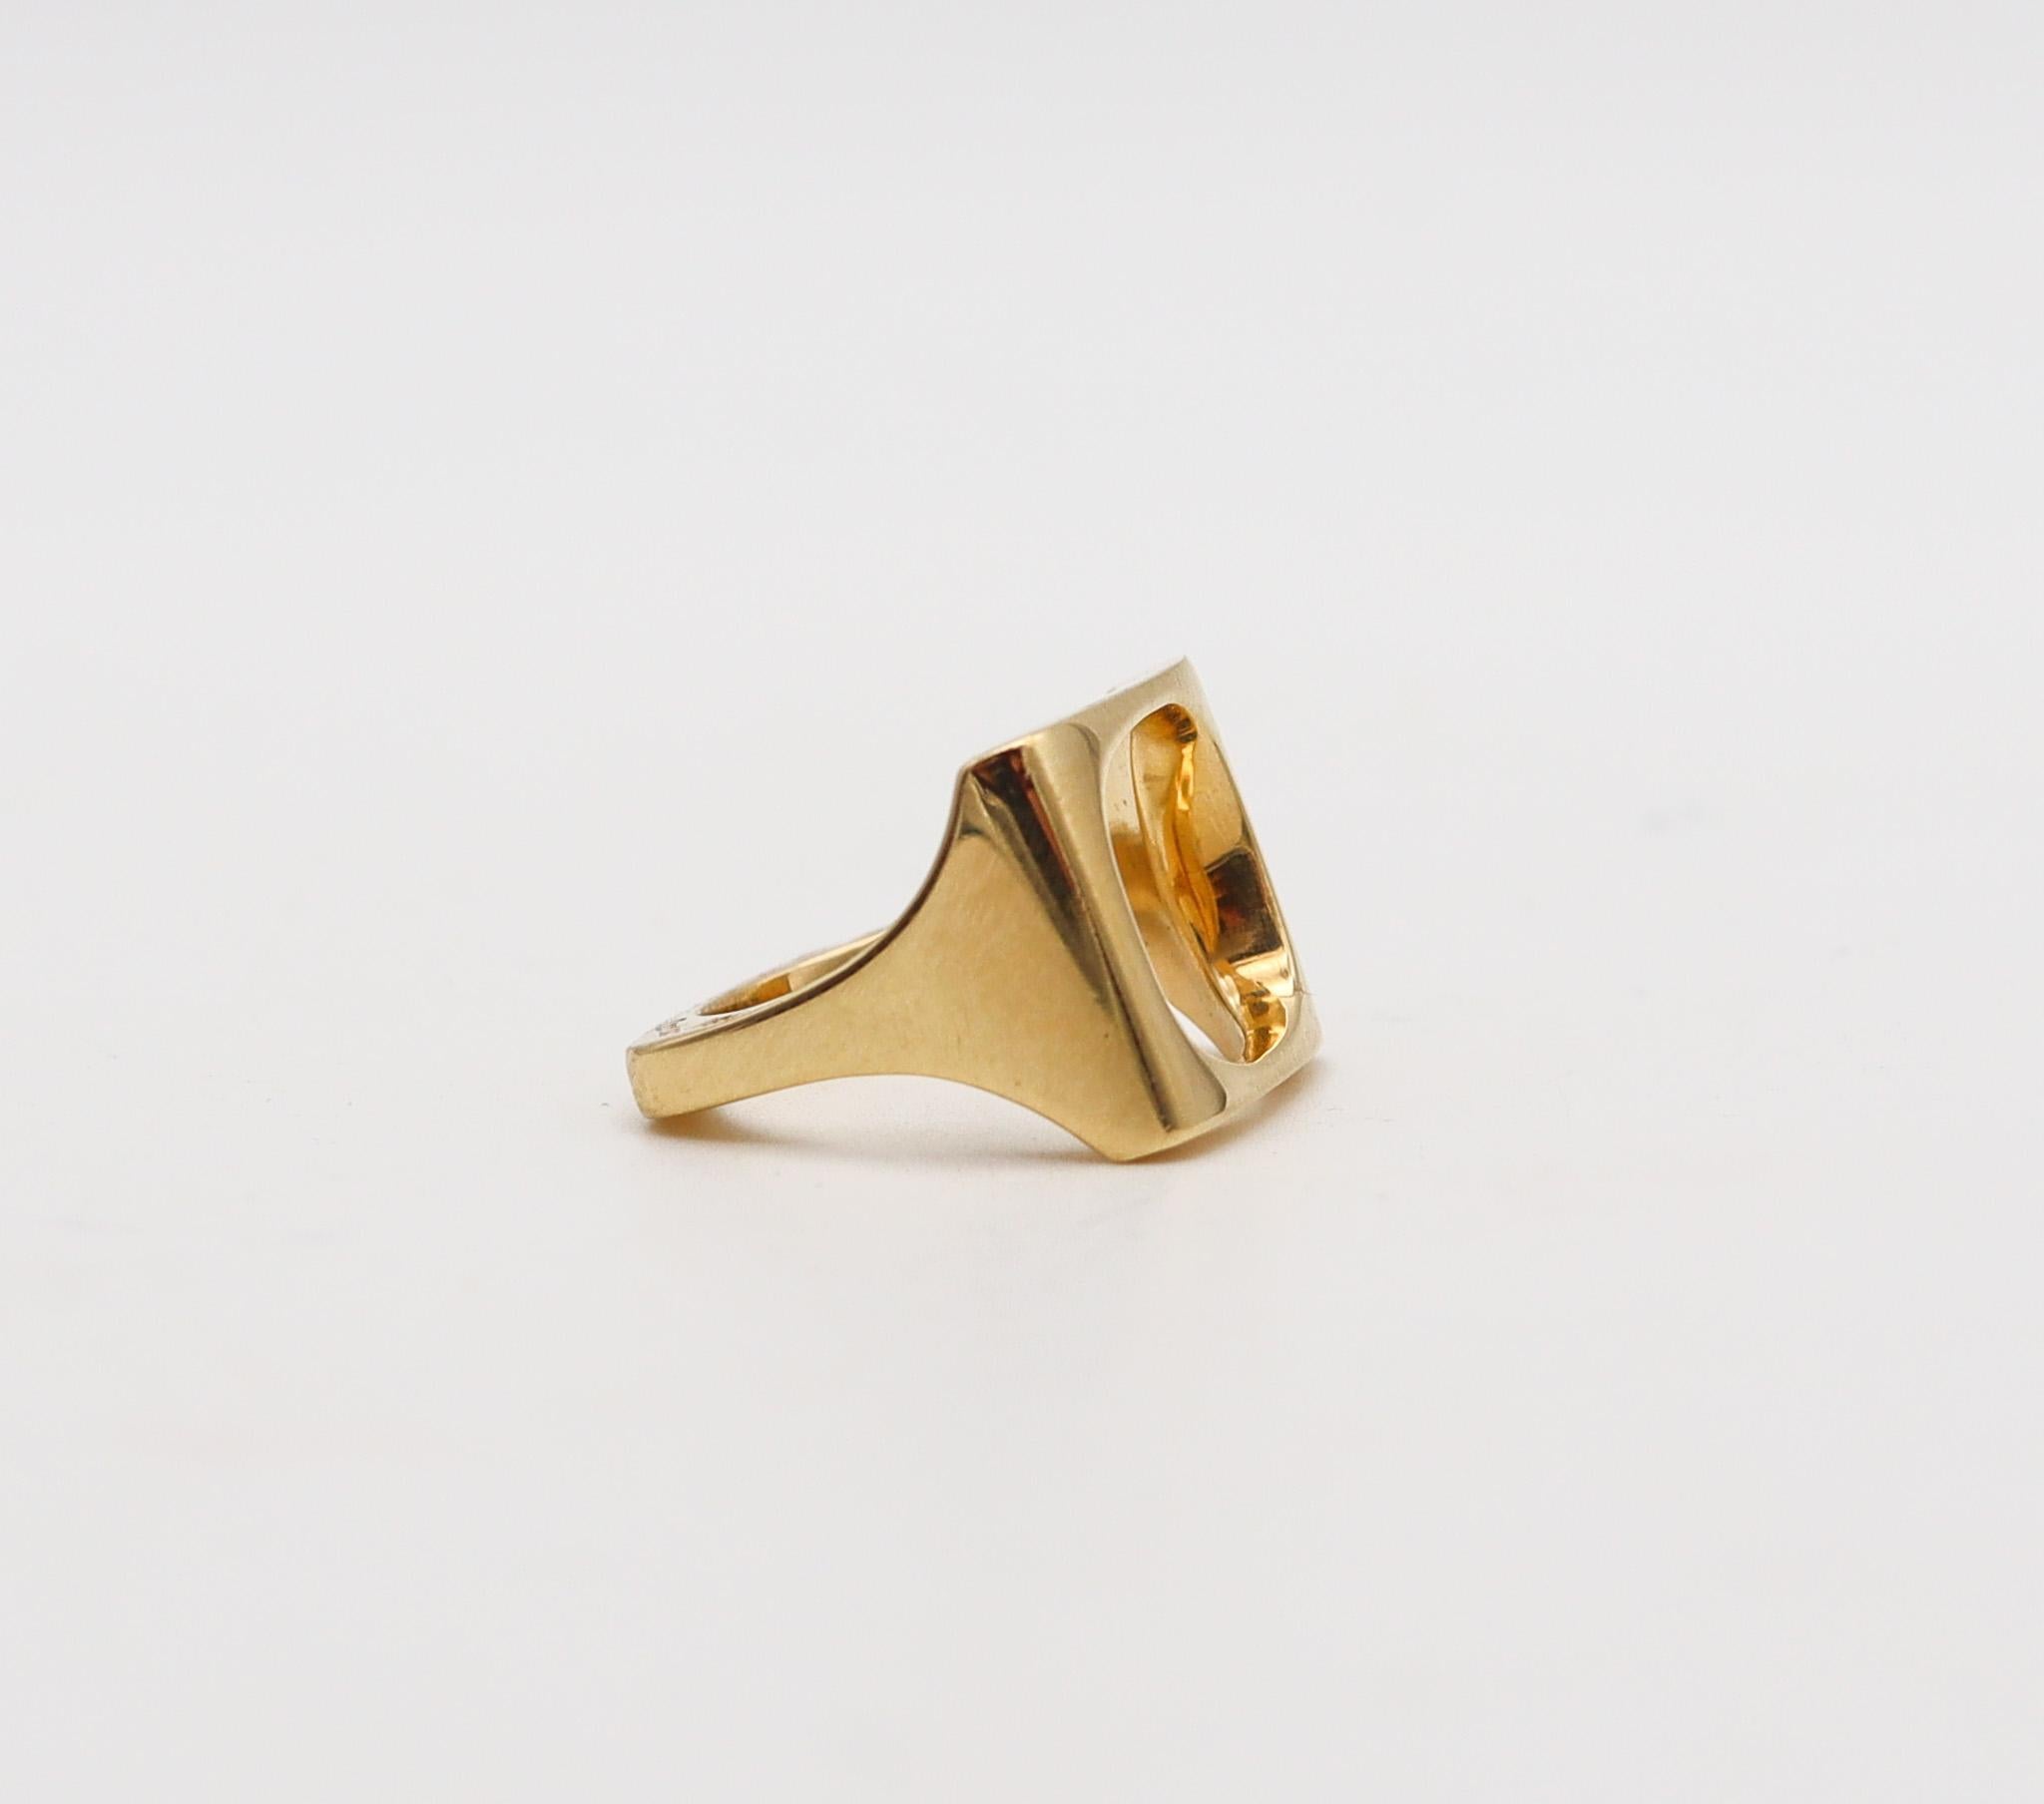 Modernist Cartier Paris 1970 By Dinh Van Sculptural Cushion Oval Ring In 18Kt Yellow Gold For Sale